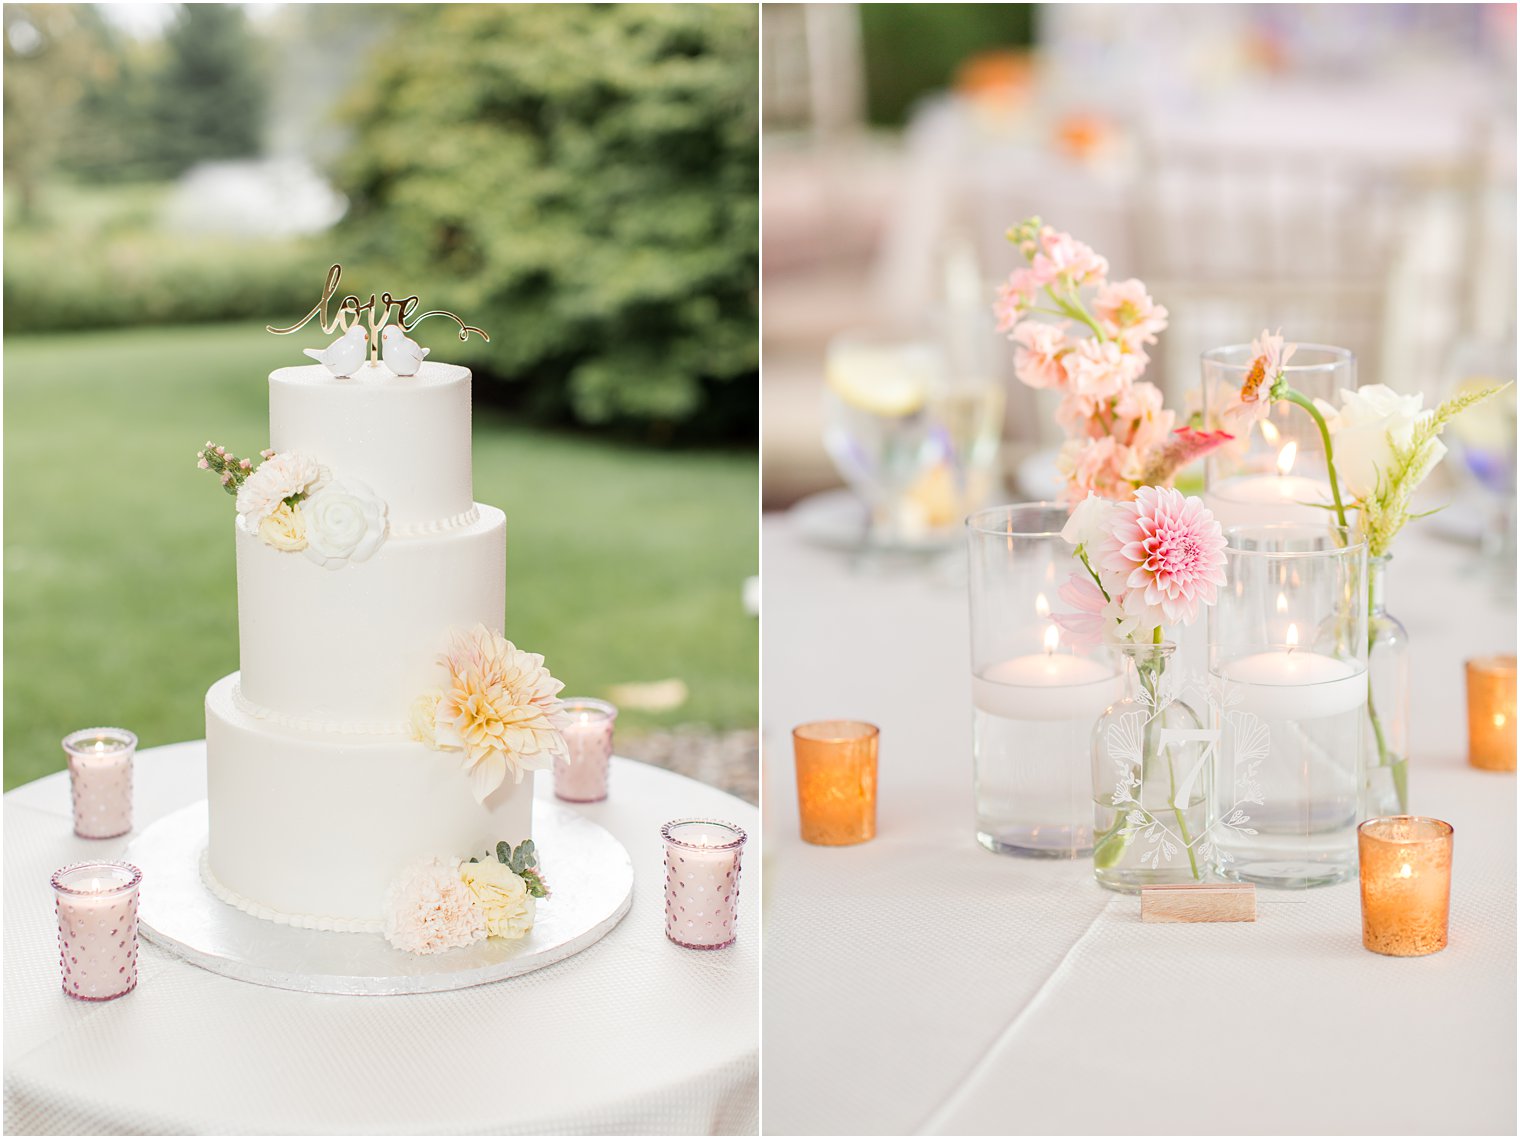 wedding cake and simple floral centerpieces for NJ wedding reception